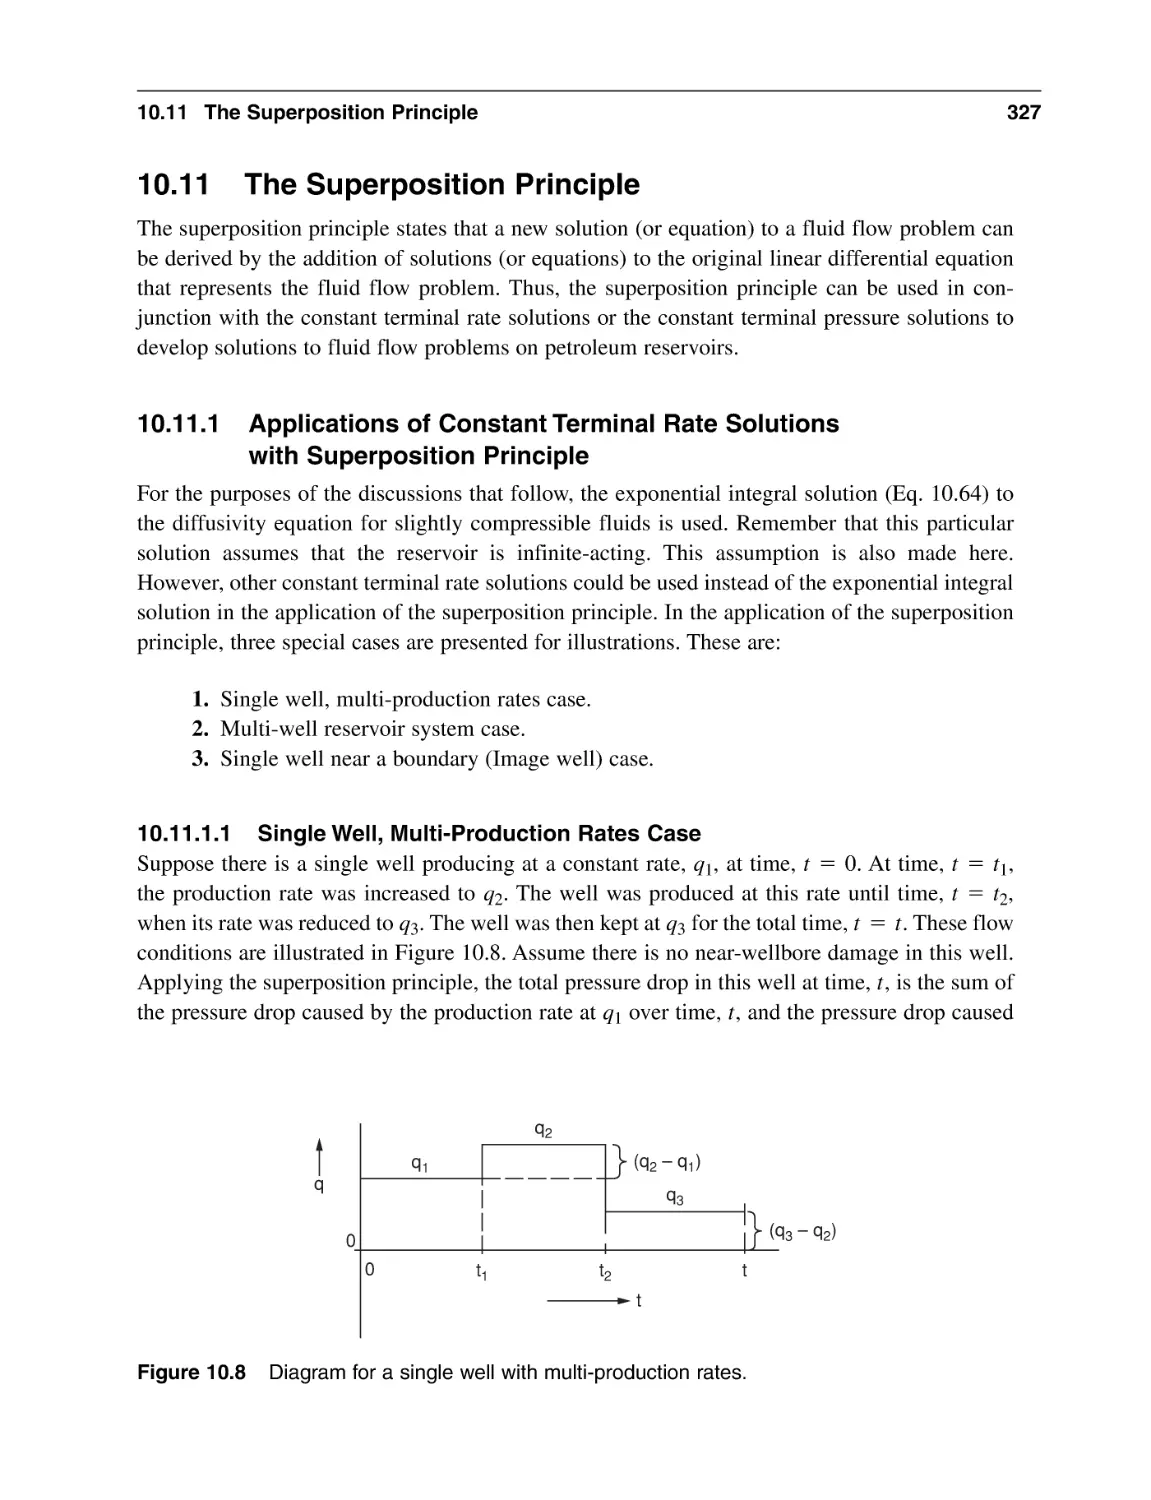 10.11 The Superposition Principle
10.11.1 Applications of Constant Terminal Rate Solutions with Superposition Principle